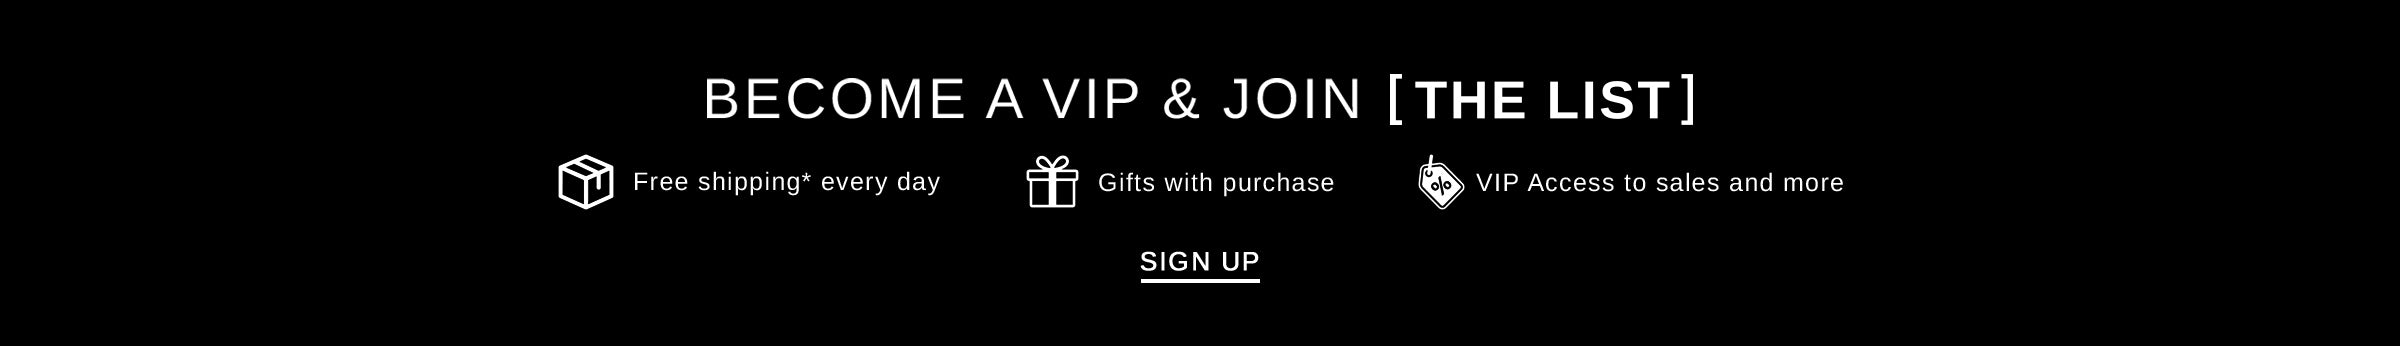 Become a VIP & Join [THE LIST] Free Shipping* every day, Gifts with purchase, VIP access to sales and more SIGN UP